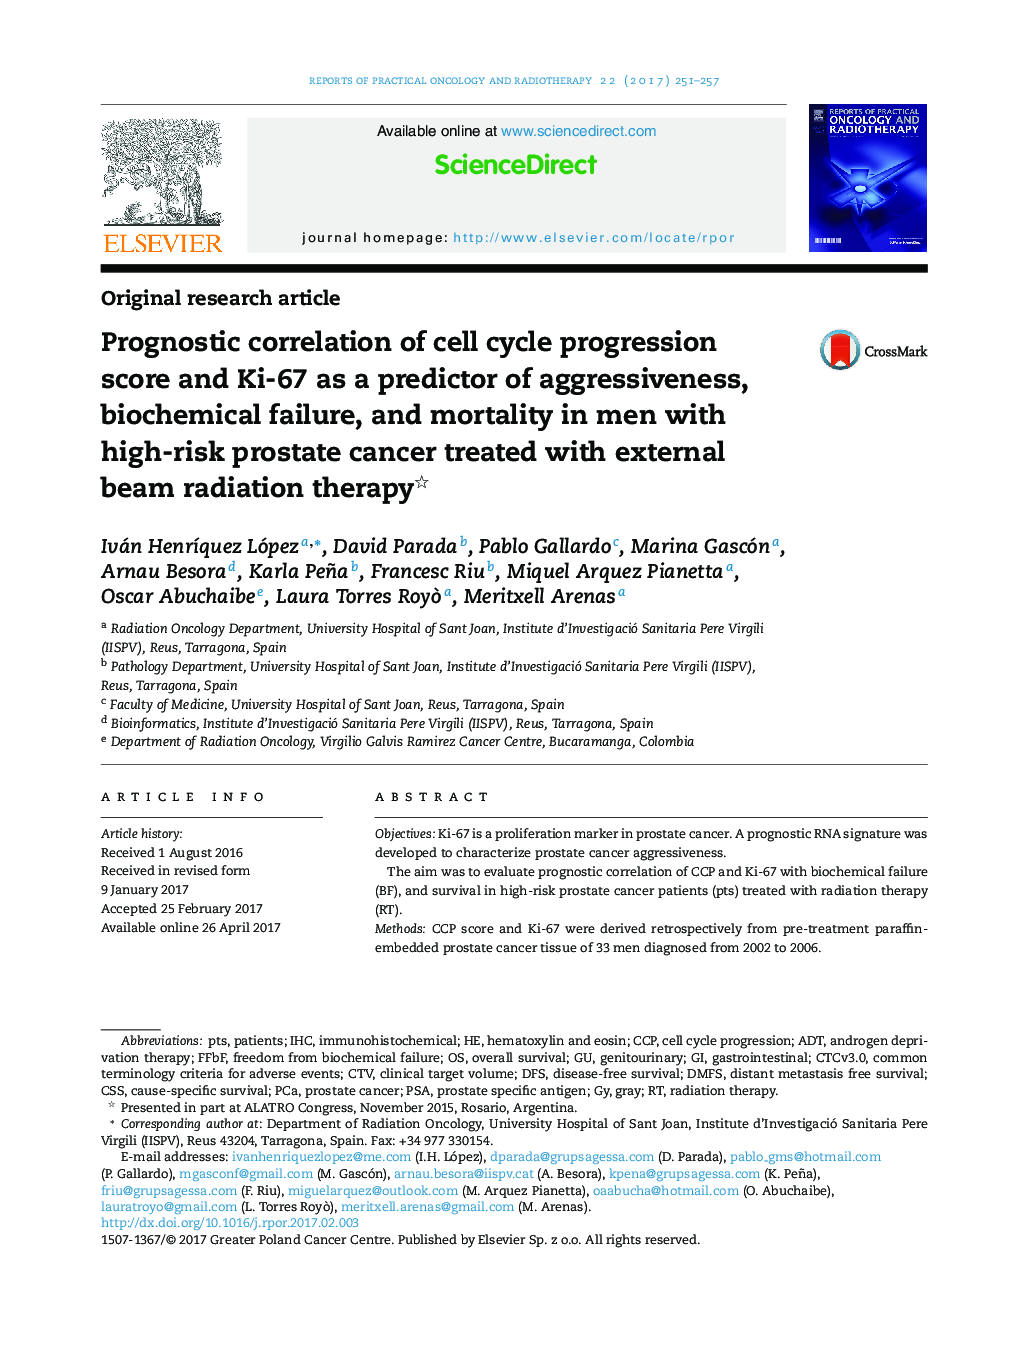 Prognostic correlation of cell cycle progression score and Ki-67 as a predictor of aggressiveness, biochemical failure, and mortality in men with high-risk prostate cancer treated with external beam radiation therapy